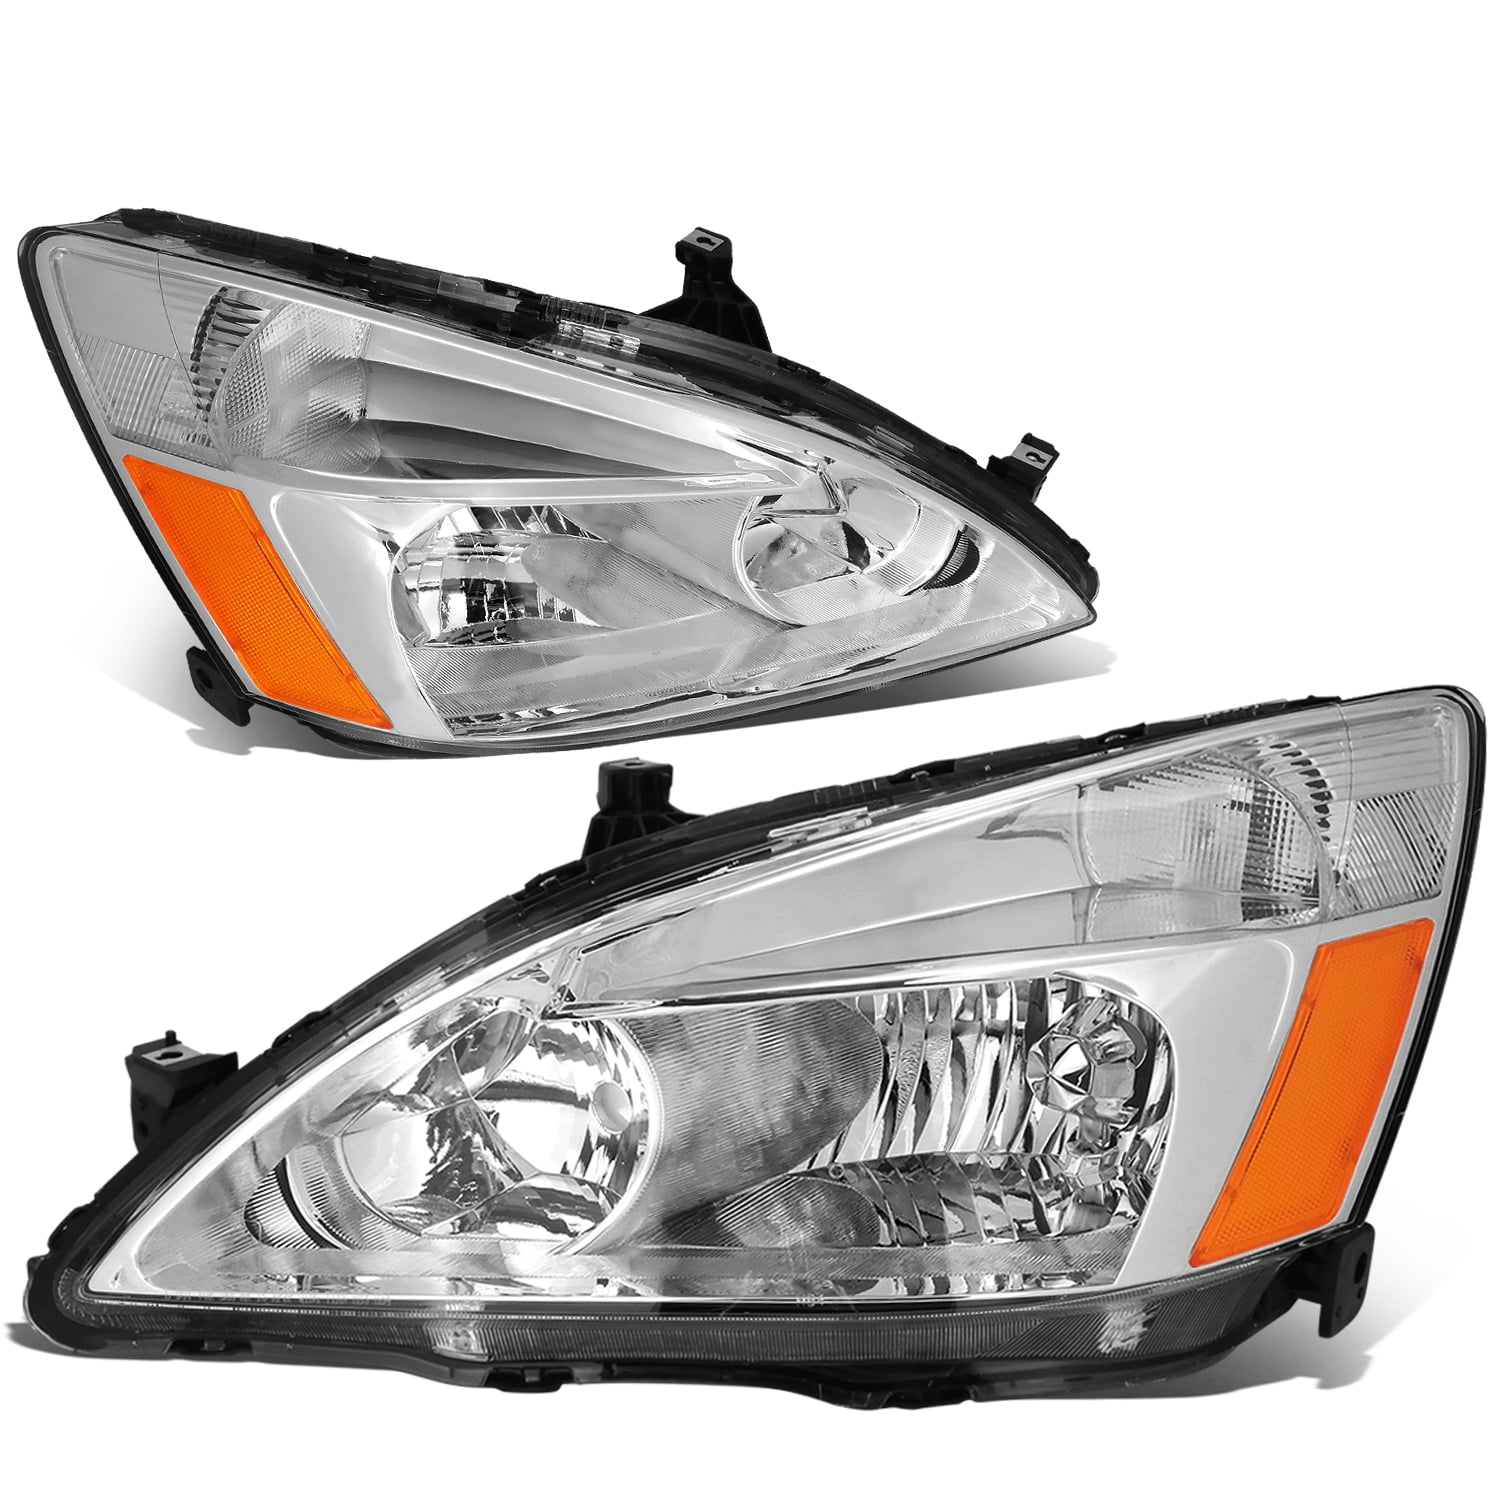 Replacement for 03-07 Honda Accord Pair of Chrome Housing Clear Corner Replacement Headlights/Lamps 